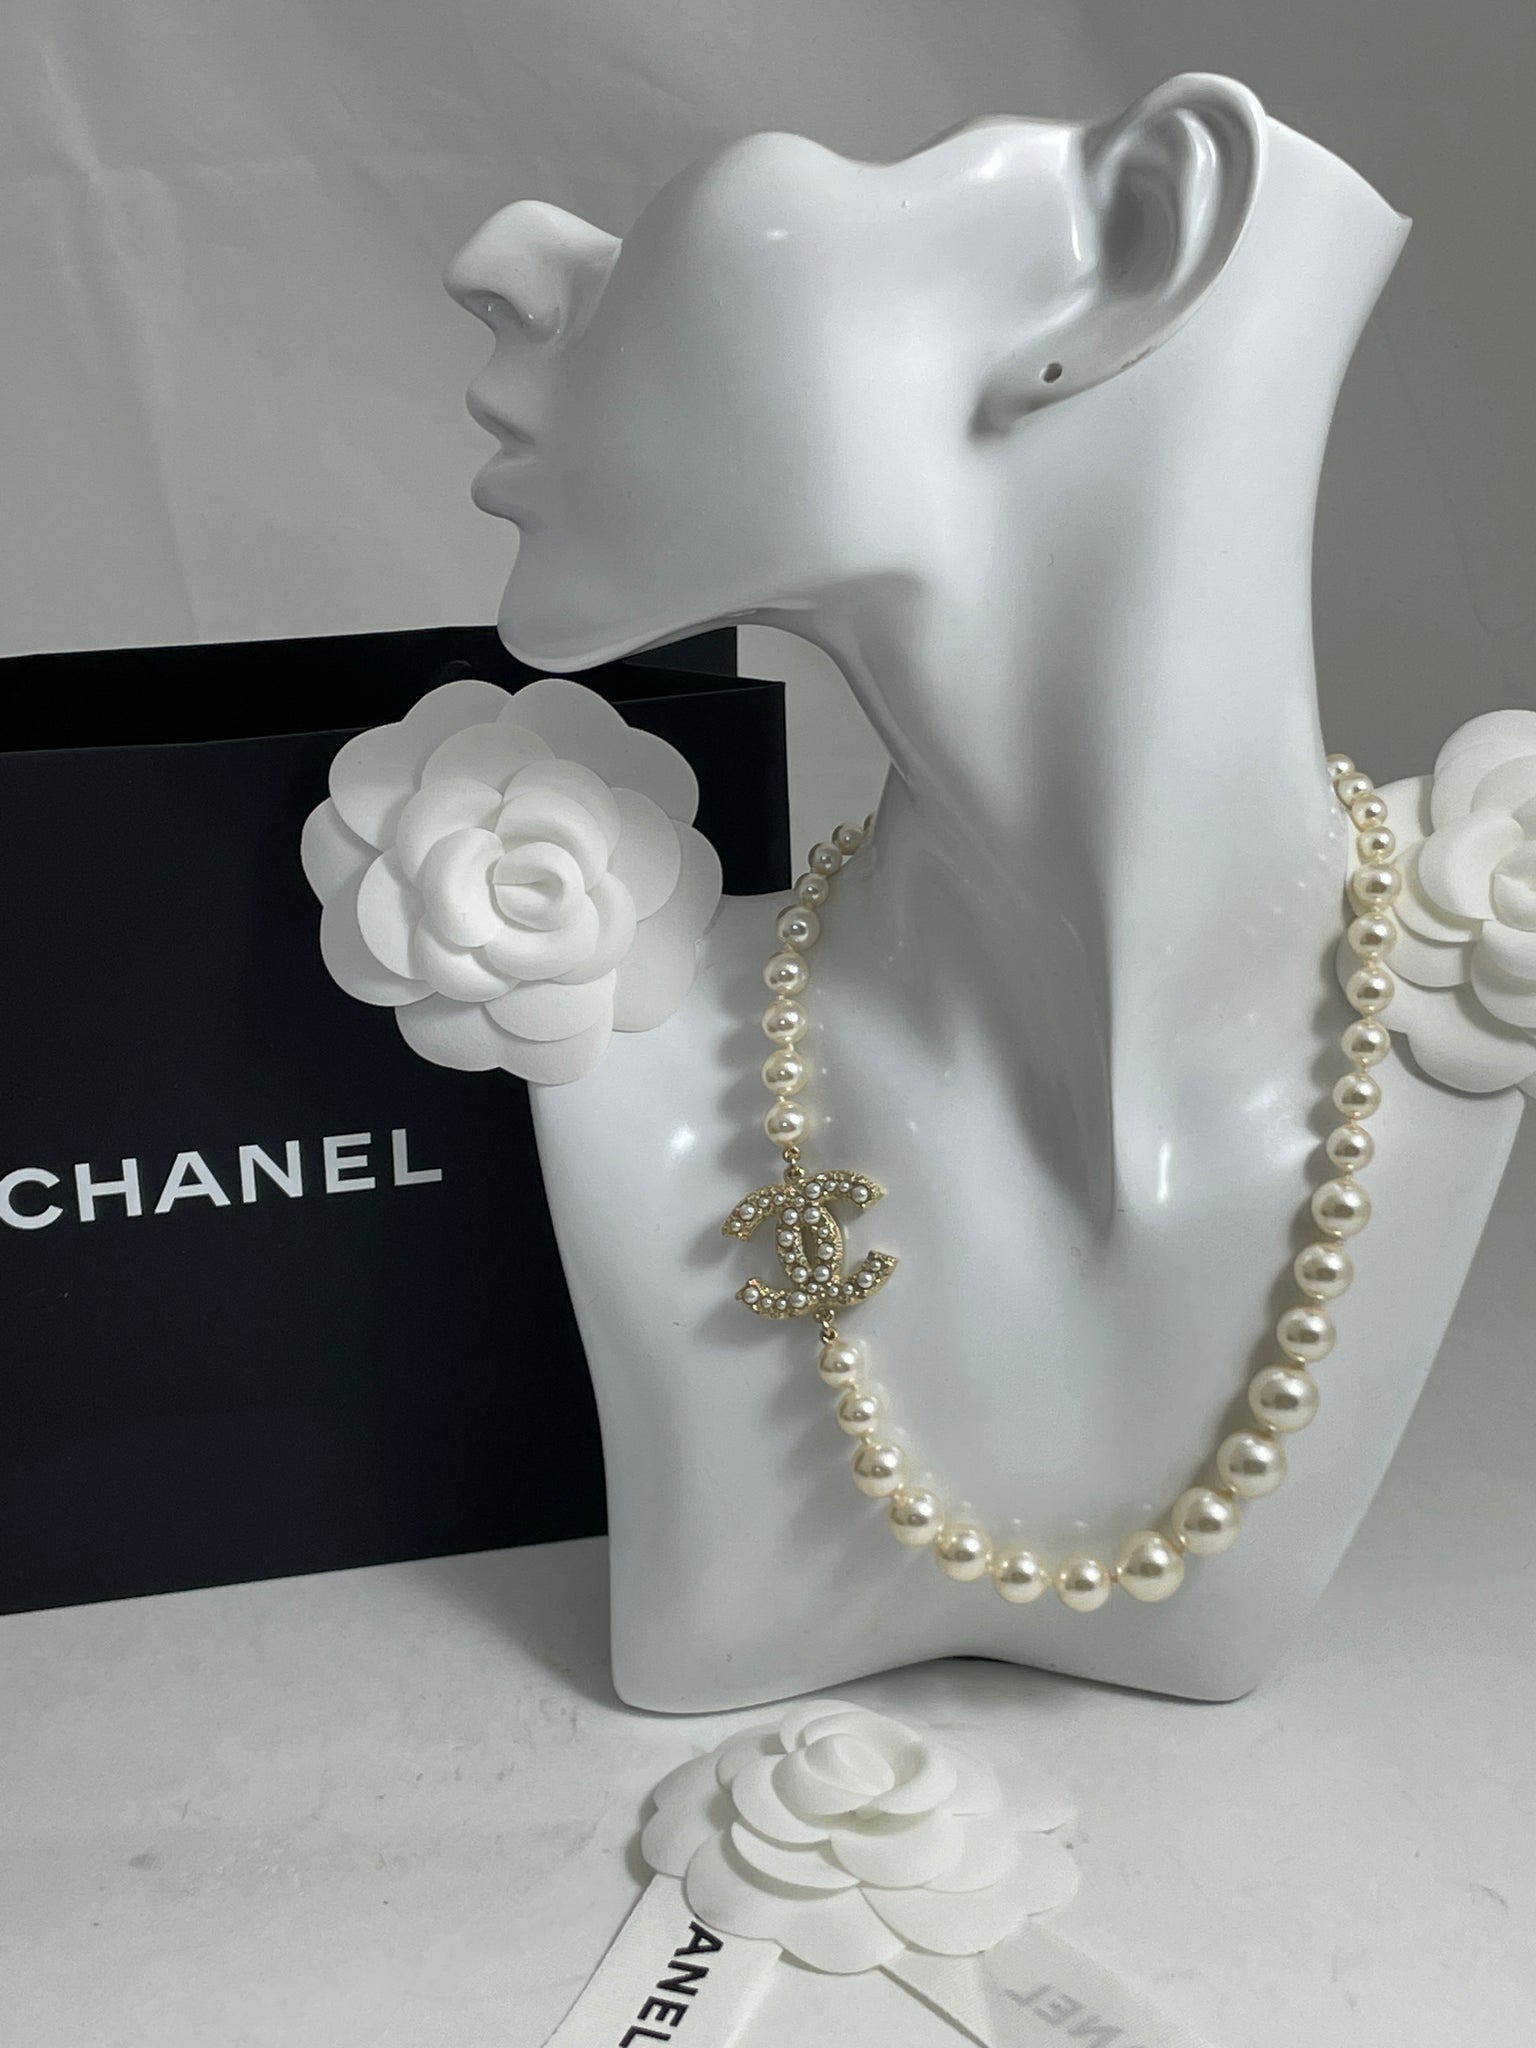 Chanel necklace fall - Gem